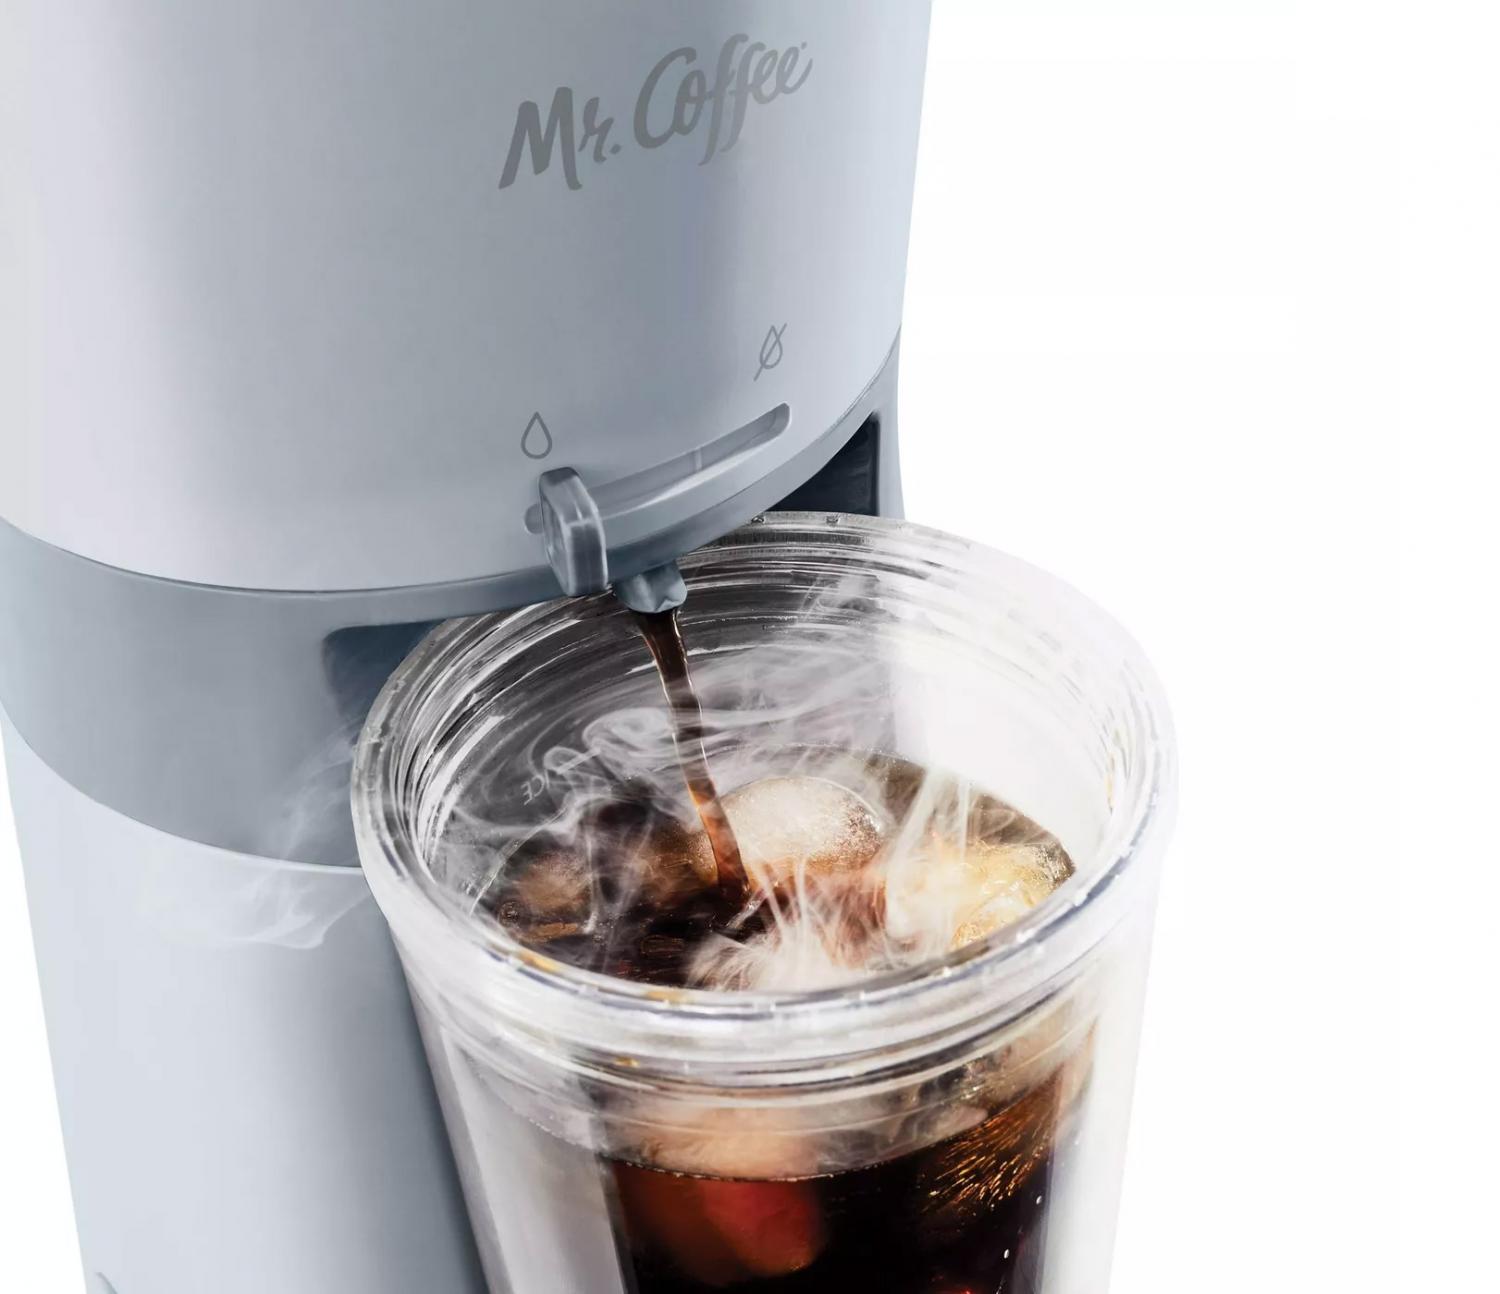 Mr. Coffee Iced Coffee Maker - At home iced coffee maker